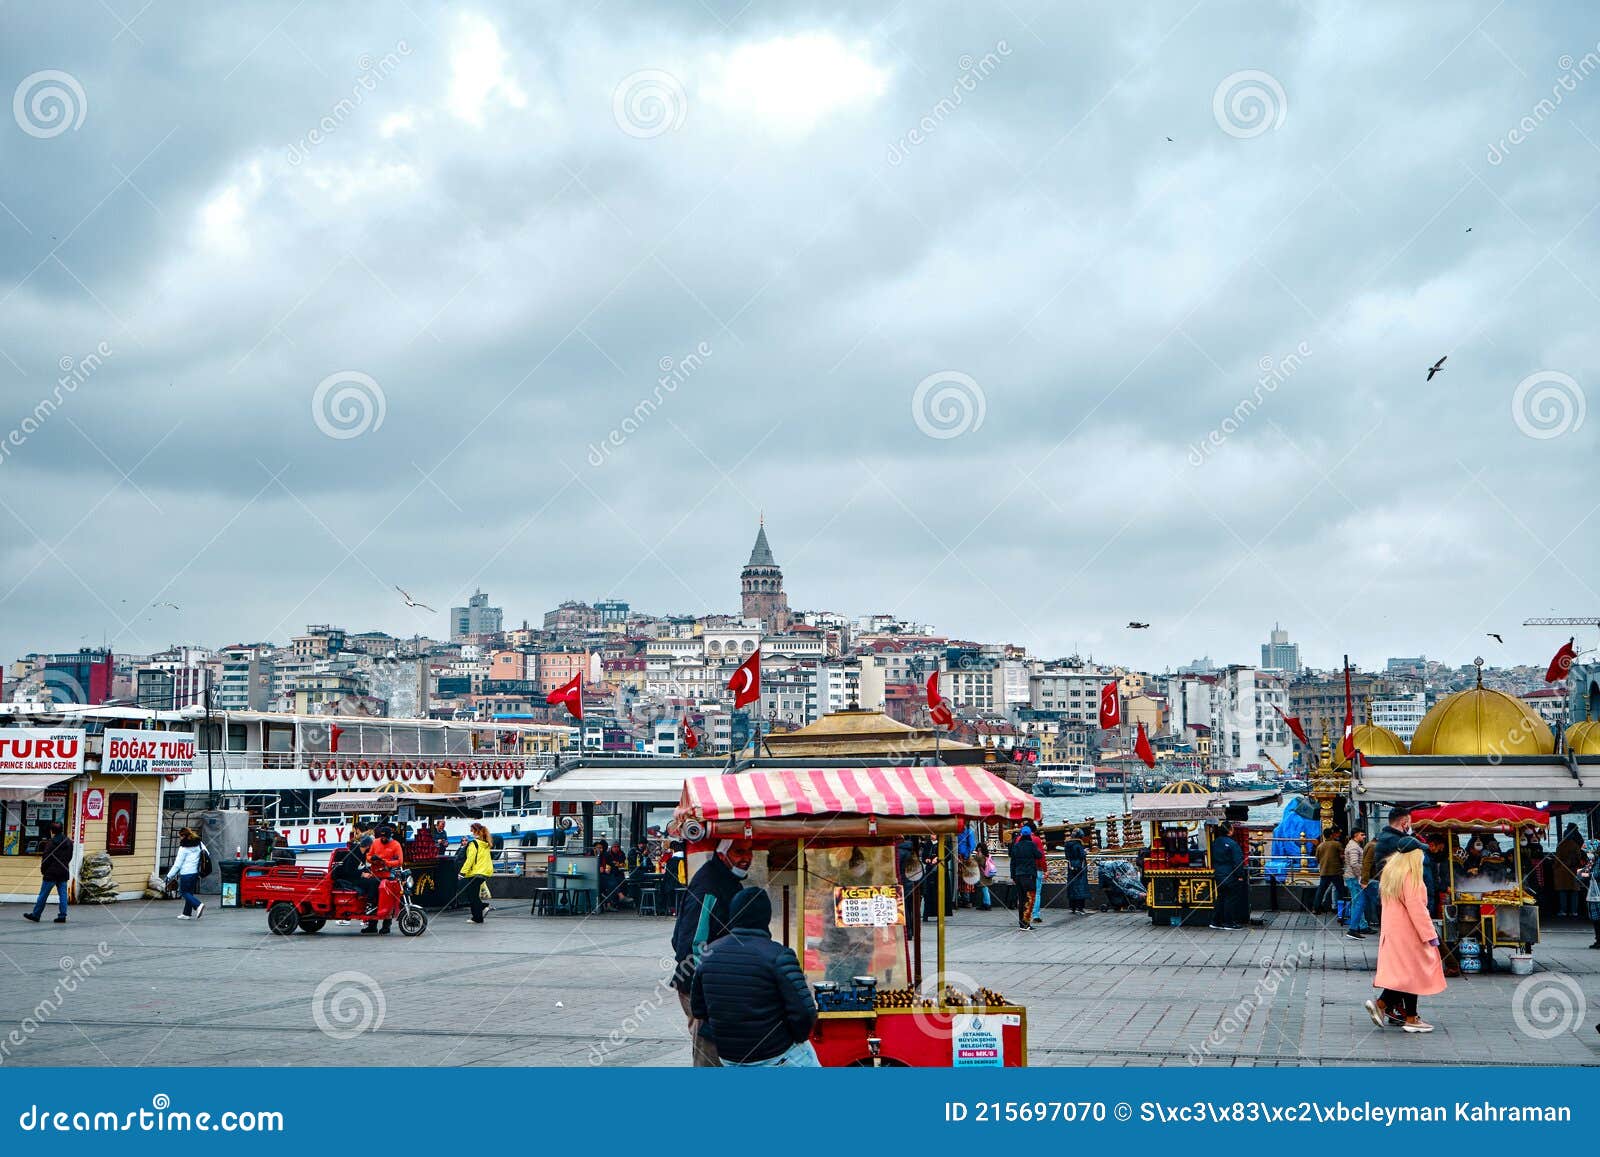 122 corn sellers photos free royalty free stock photos from dreamstime